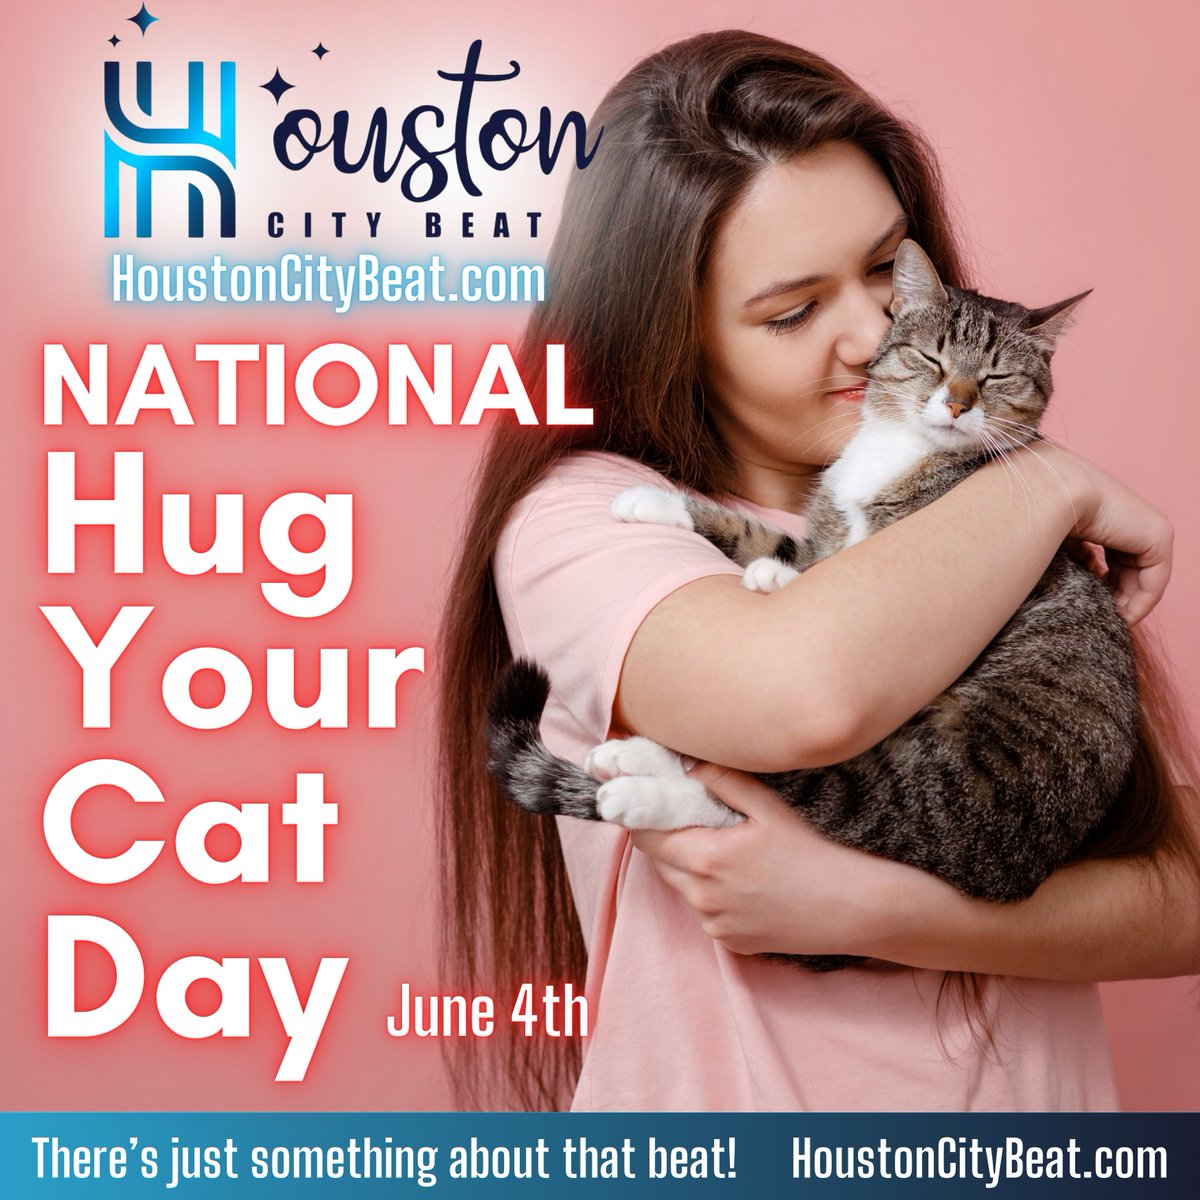 It’s National Hug Your Cat Day! Have a purr-fect day holding and hugging your favorite feline. 

#NationalHugYourCatDay
#CatDay
#Cat
#Cats
#Kitten
#Kitty
#Houston